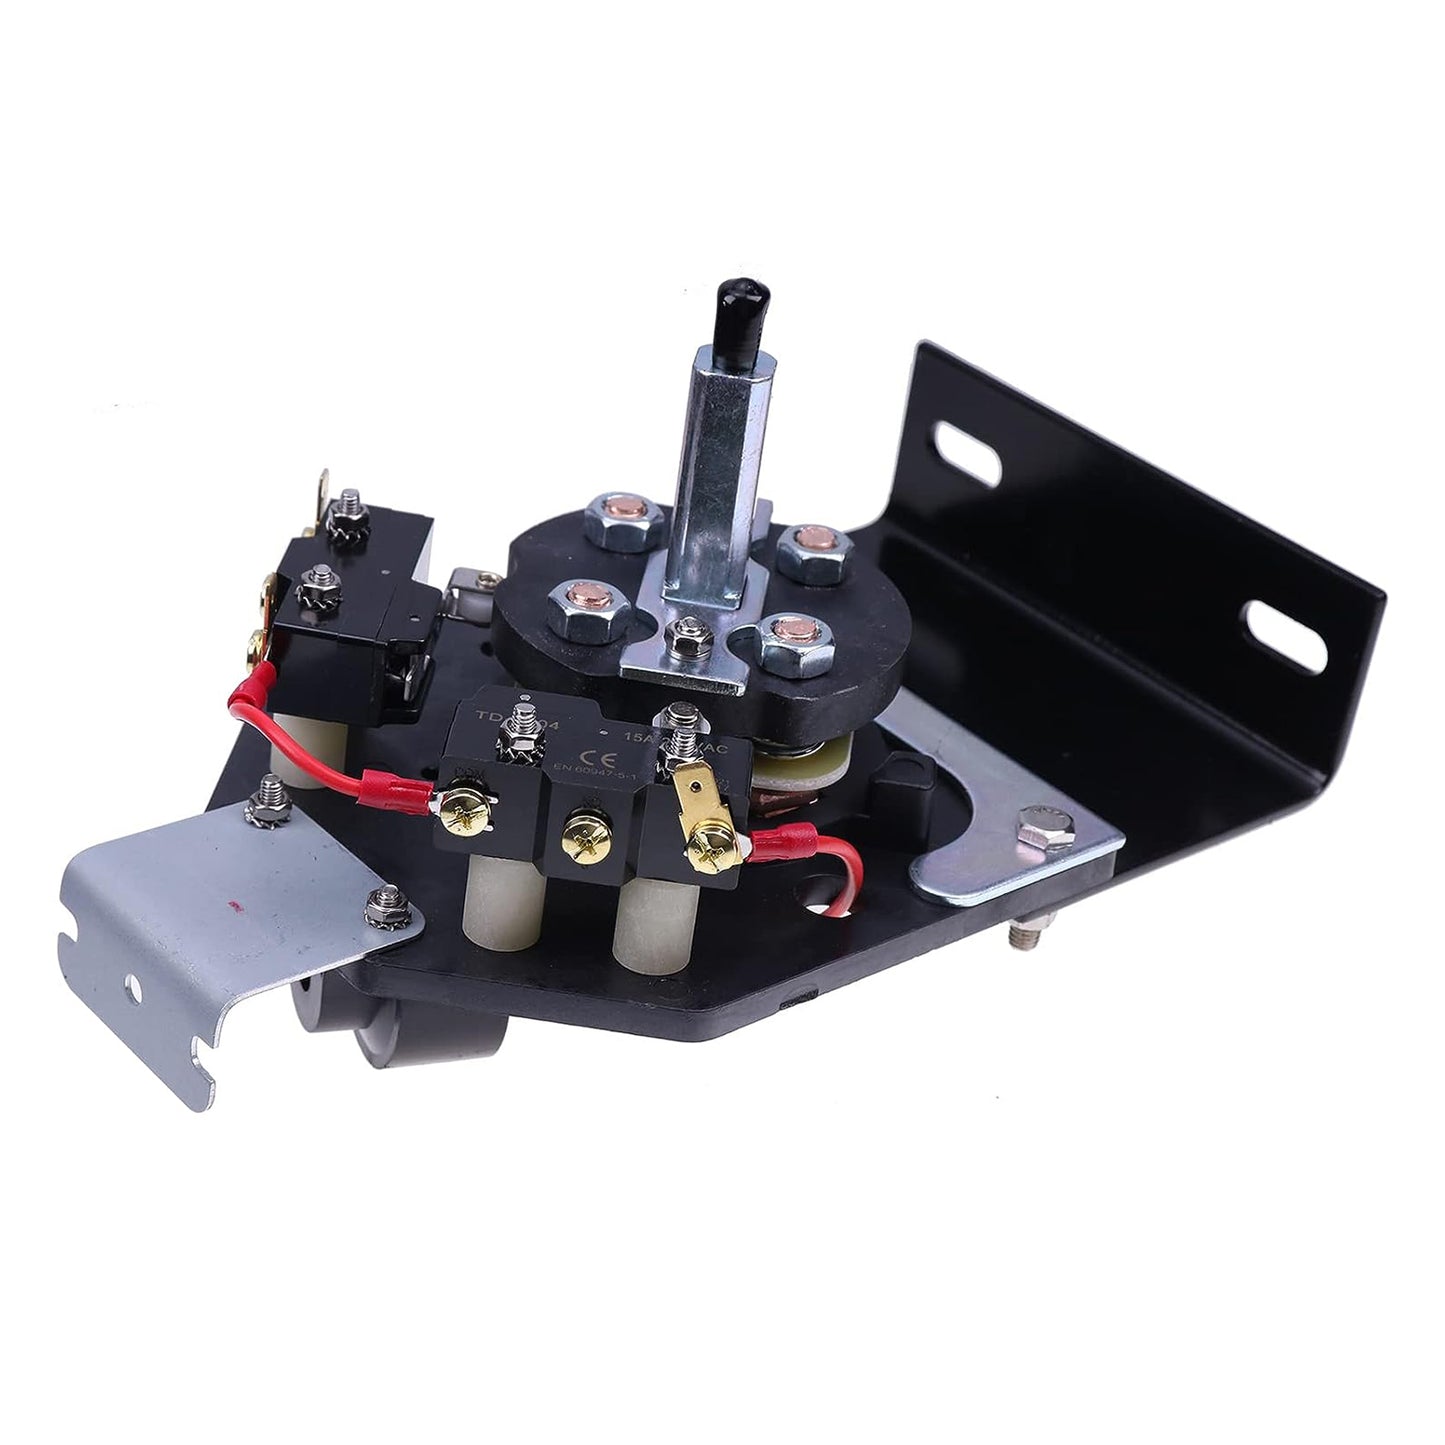 26326-G01 Forward Reverse Switch Assembly Compatible With EZGO 2-Cycle Gas 1983-1986